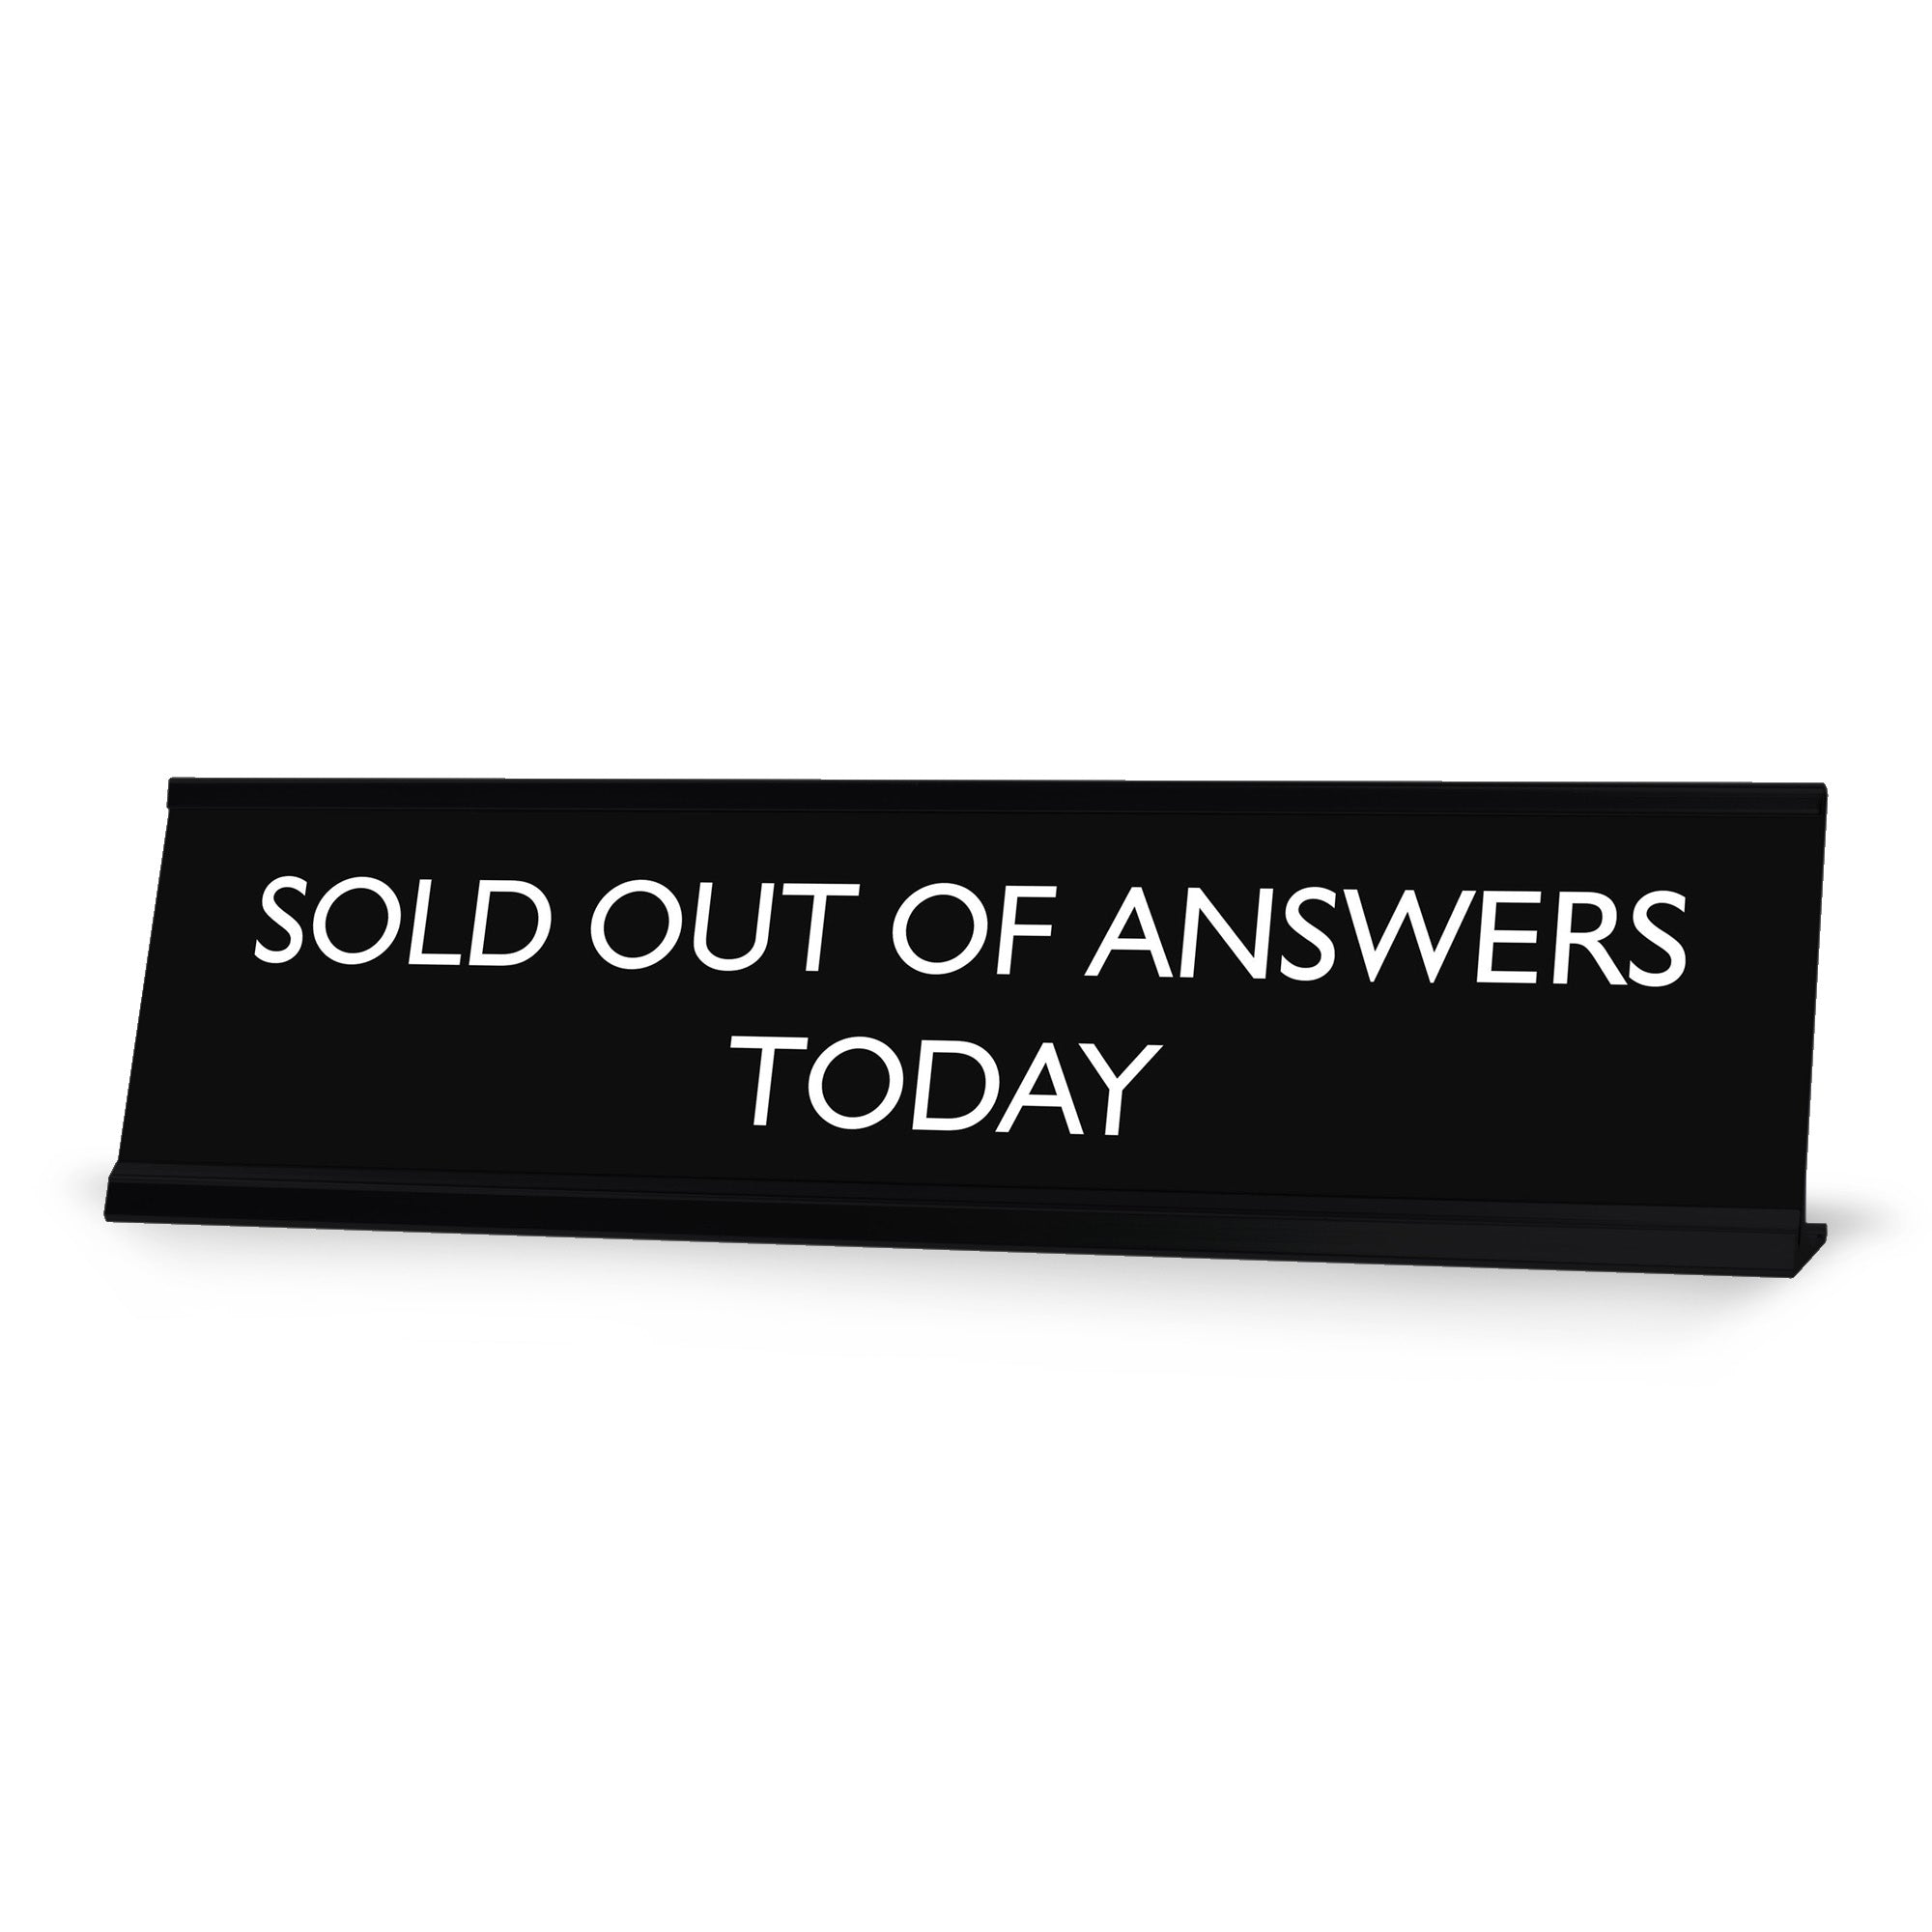 SOLD OUT OF ANSWERS TODAY Novelty Desk Sign